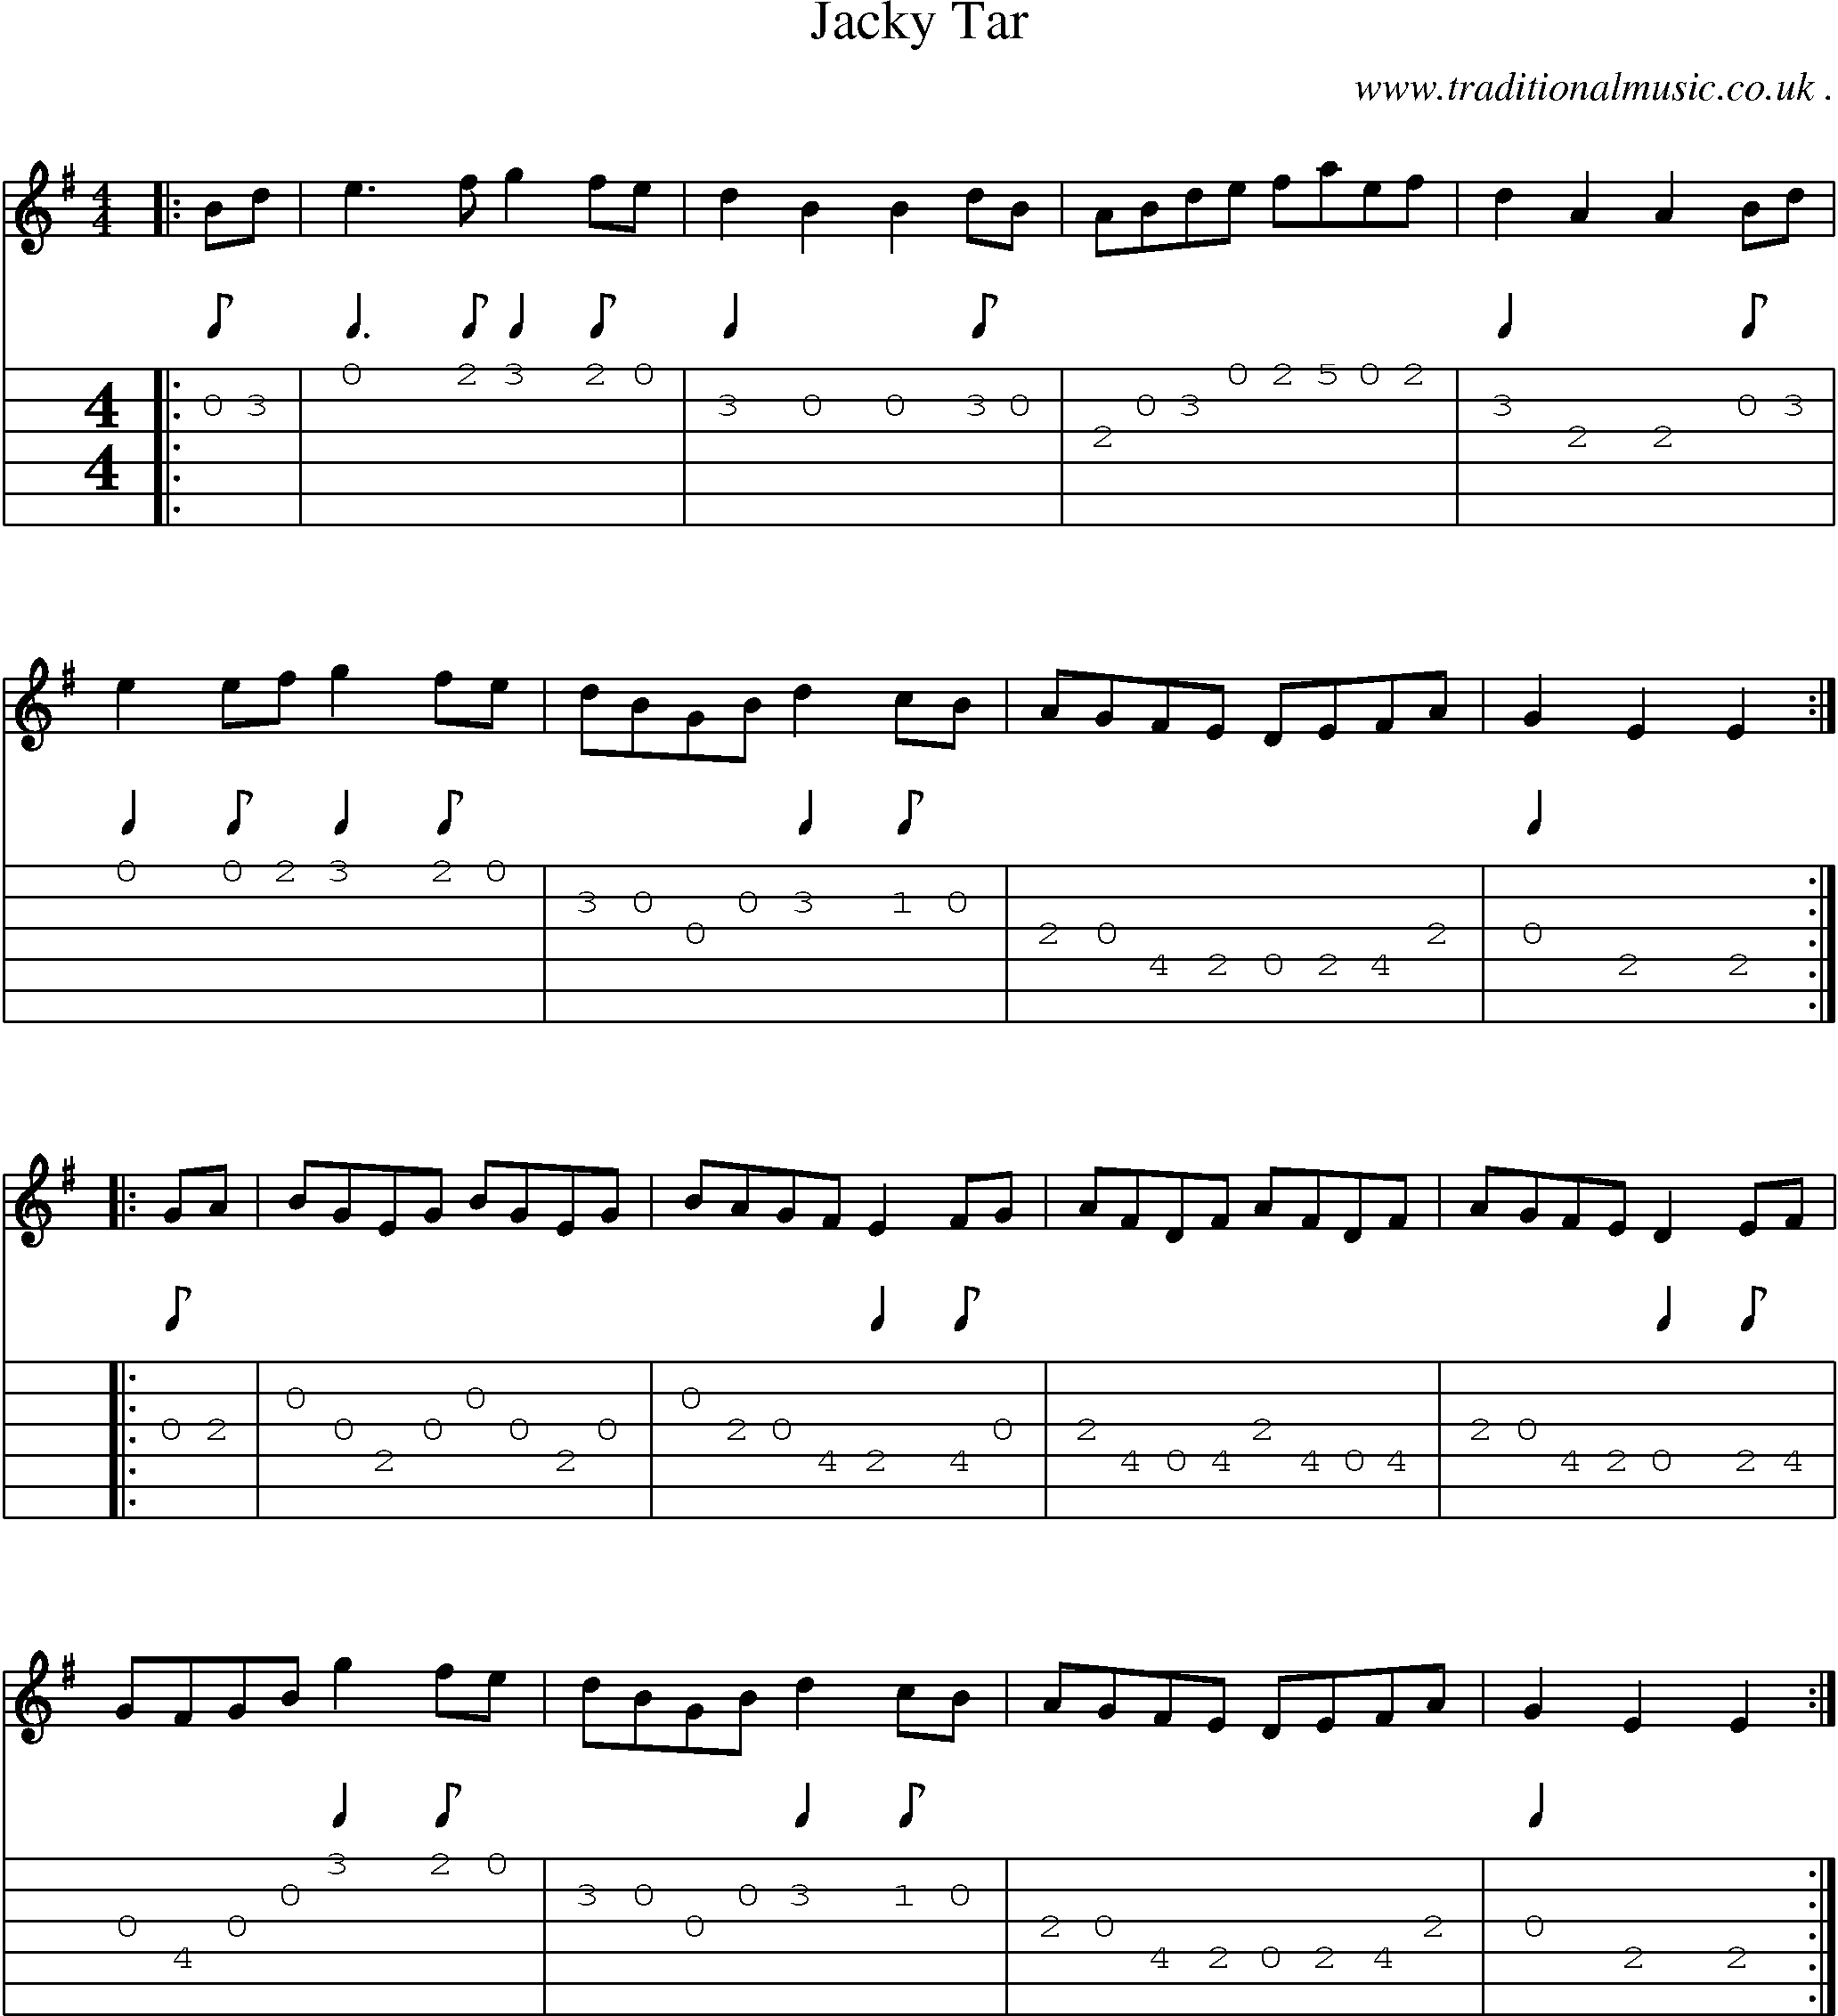 Sheet-Music and Guitar Tabs for Jacky Tar